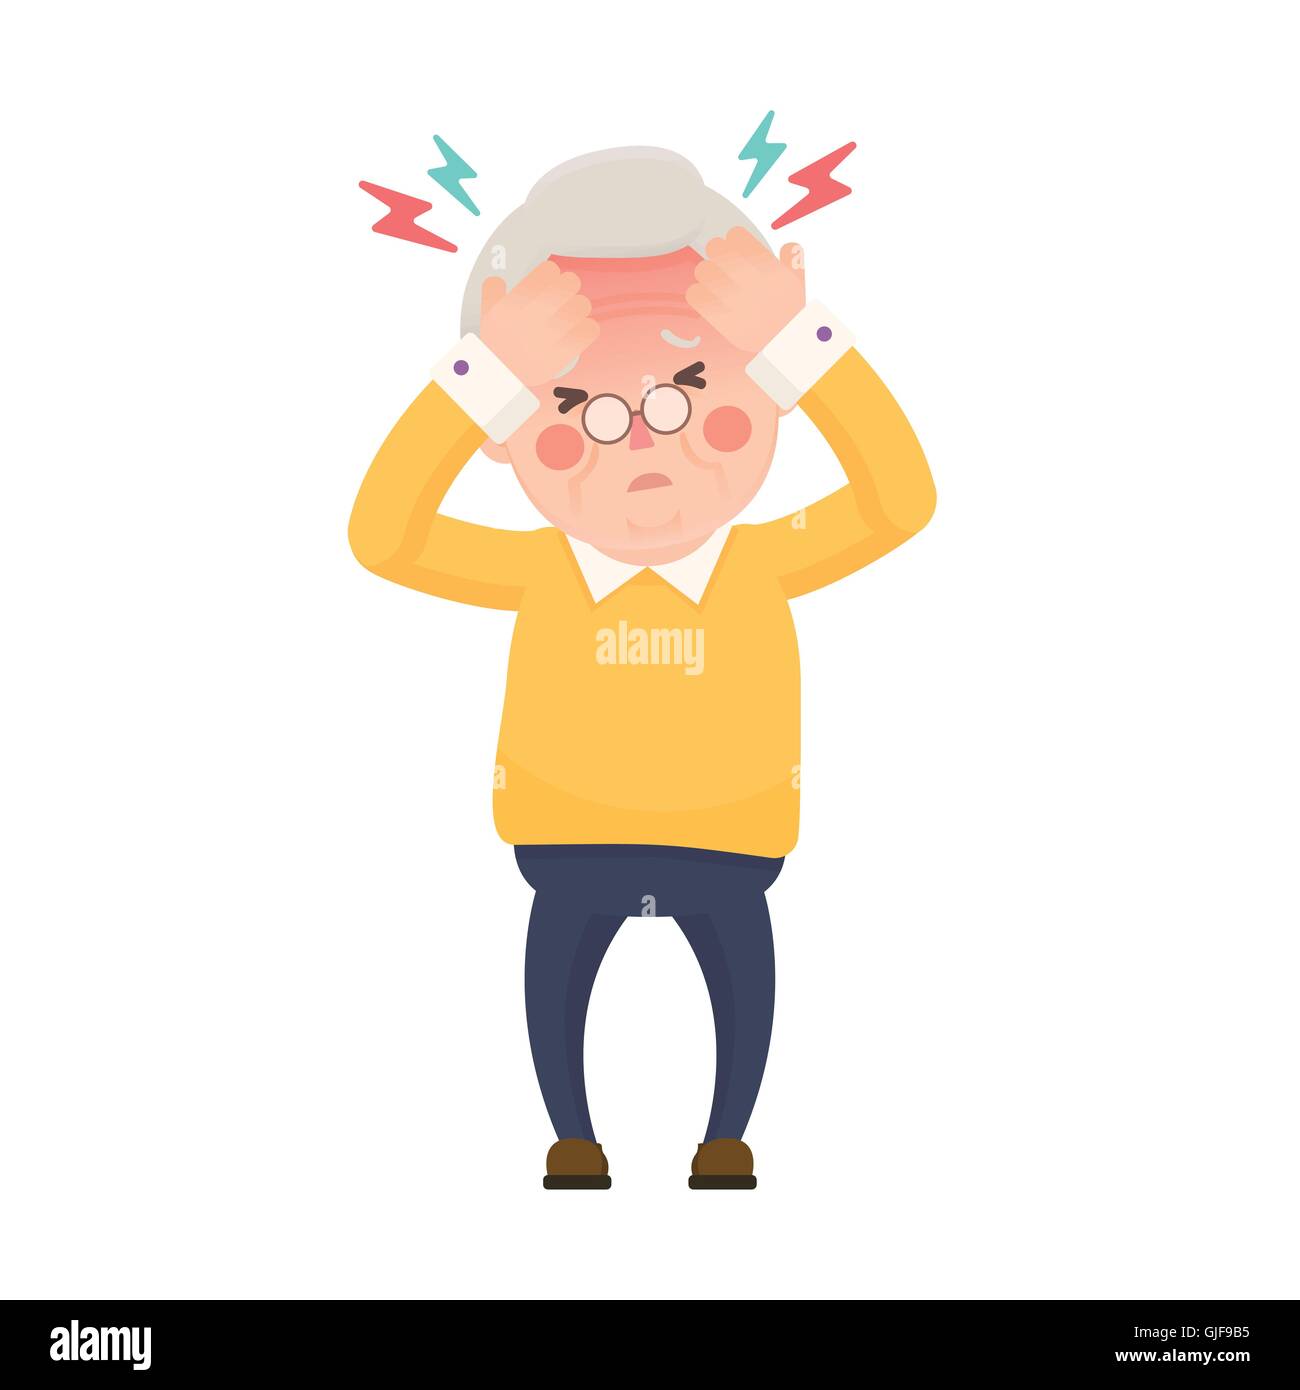 Vector Illustration of Sick Old Man Suffering from a Headache and High Temperature Holding Head in Hands. Cartoon Character. Stock Vector